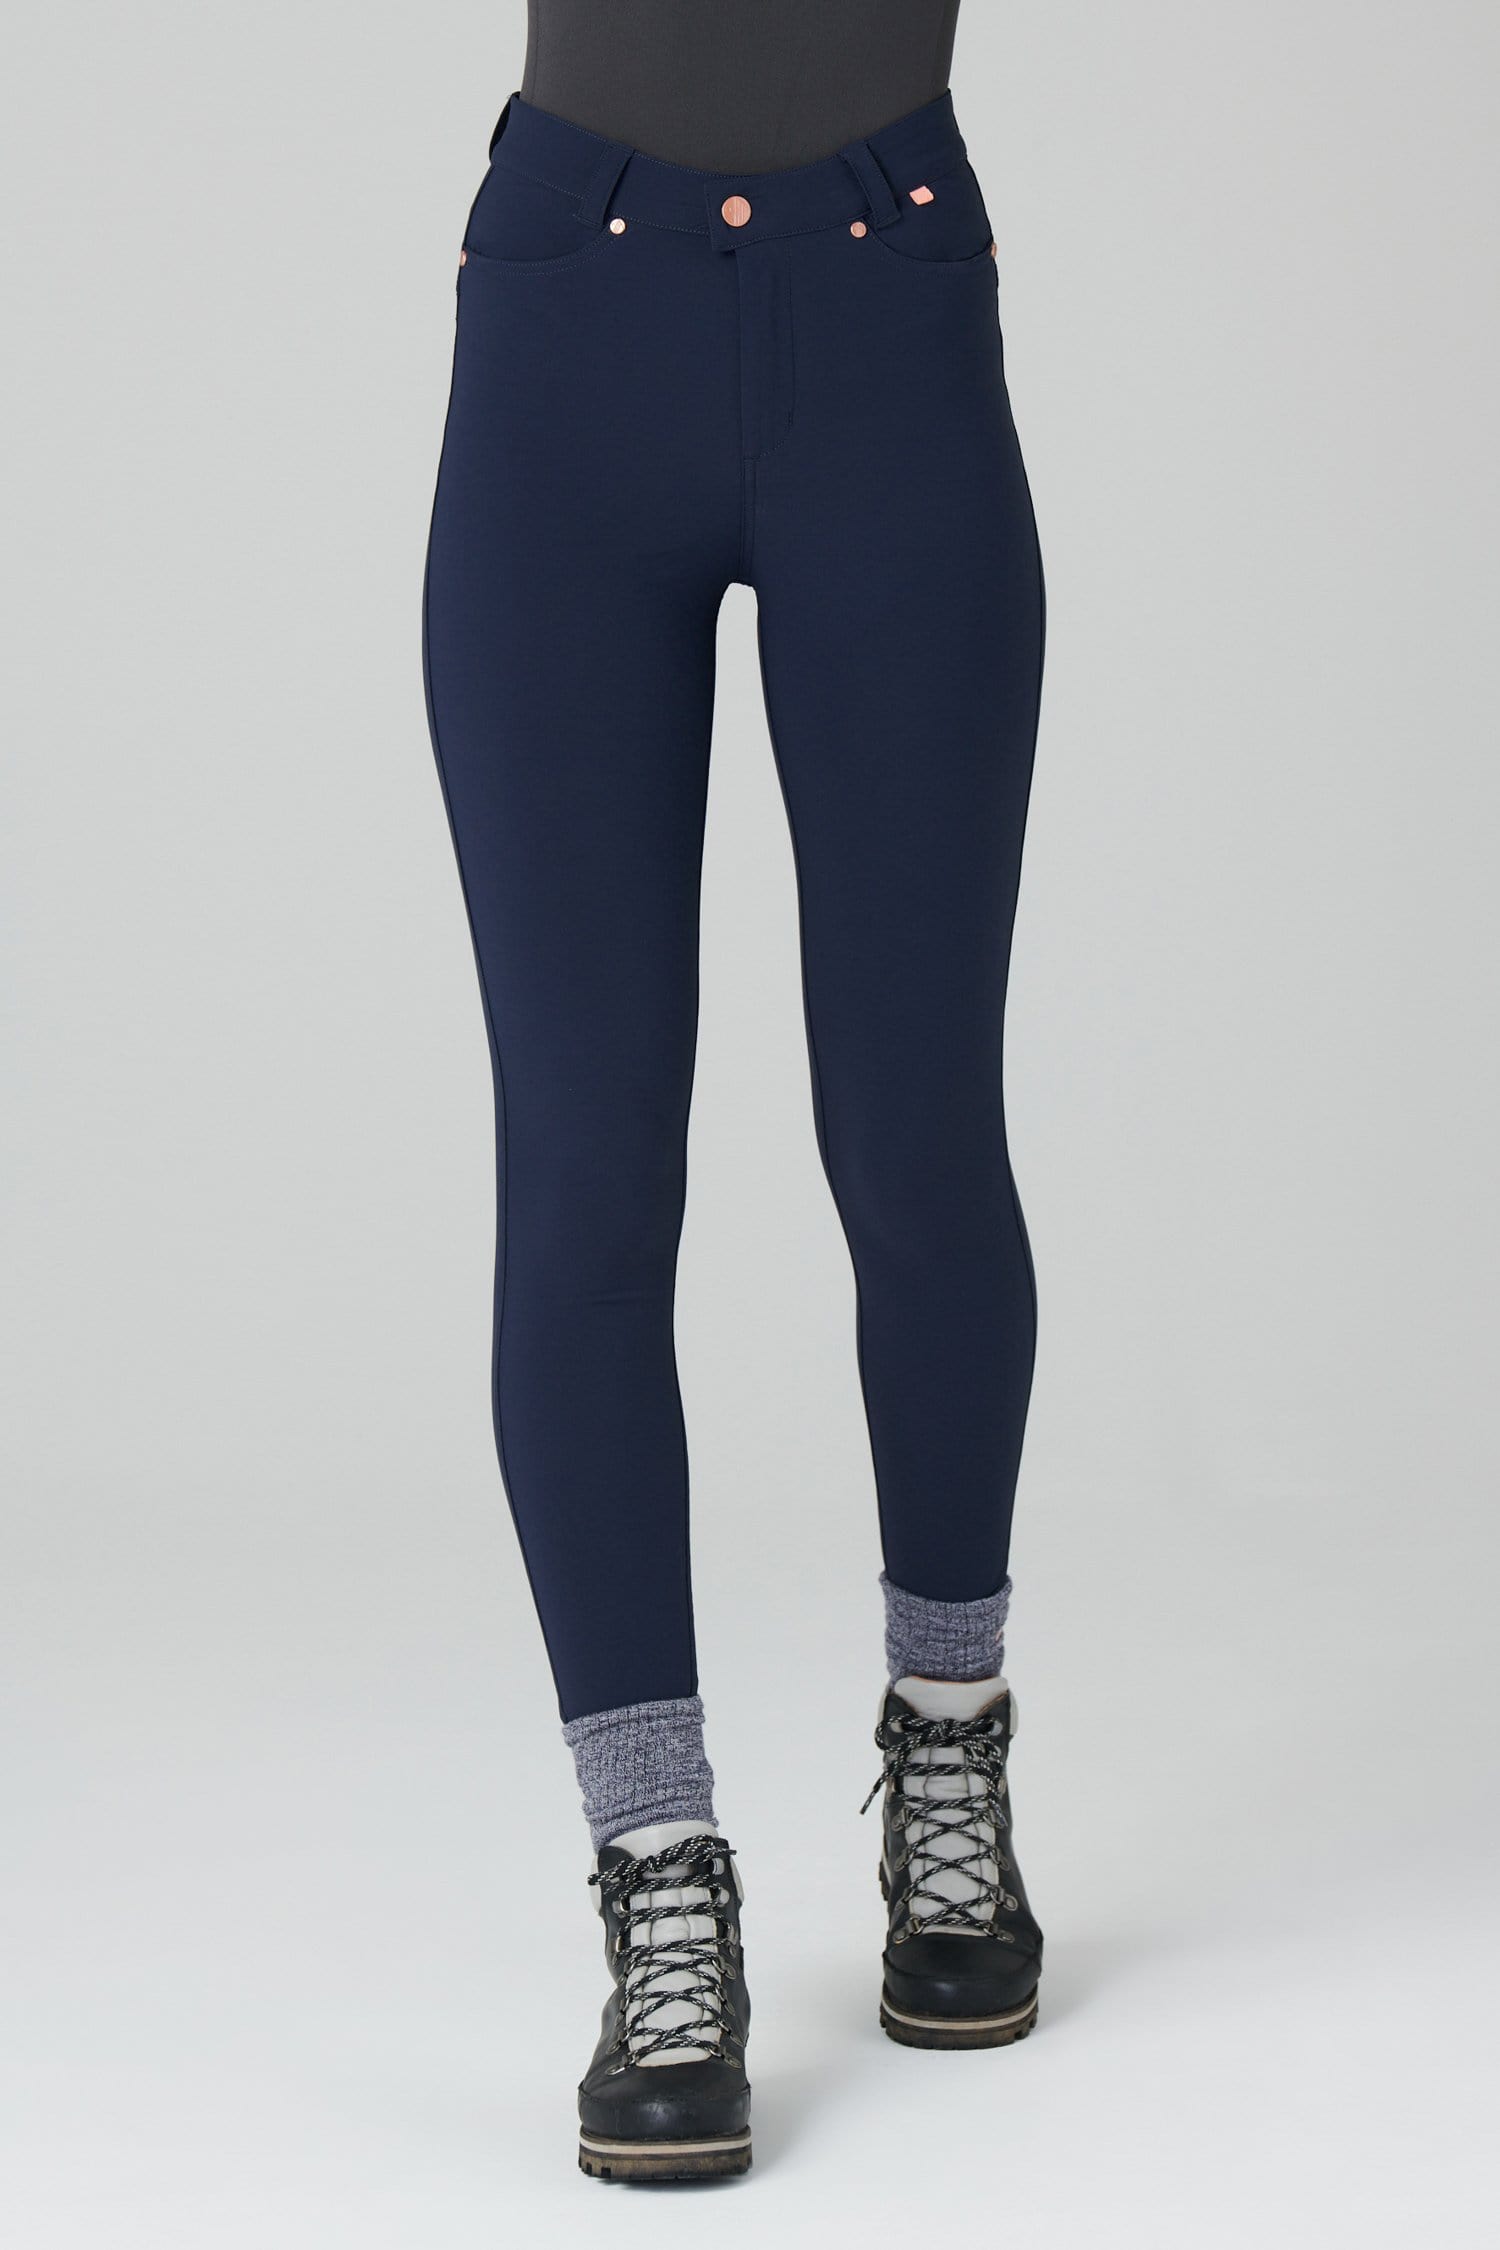 Max Stretch Skinny Outdoor Trousers - Deep Navy - 28xl / Uk10 - Womens - Acai Outdoorwear